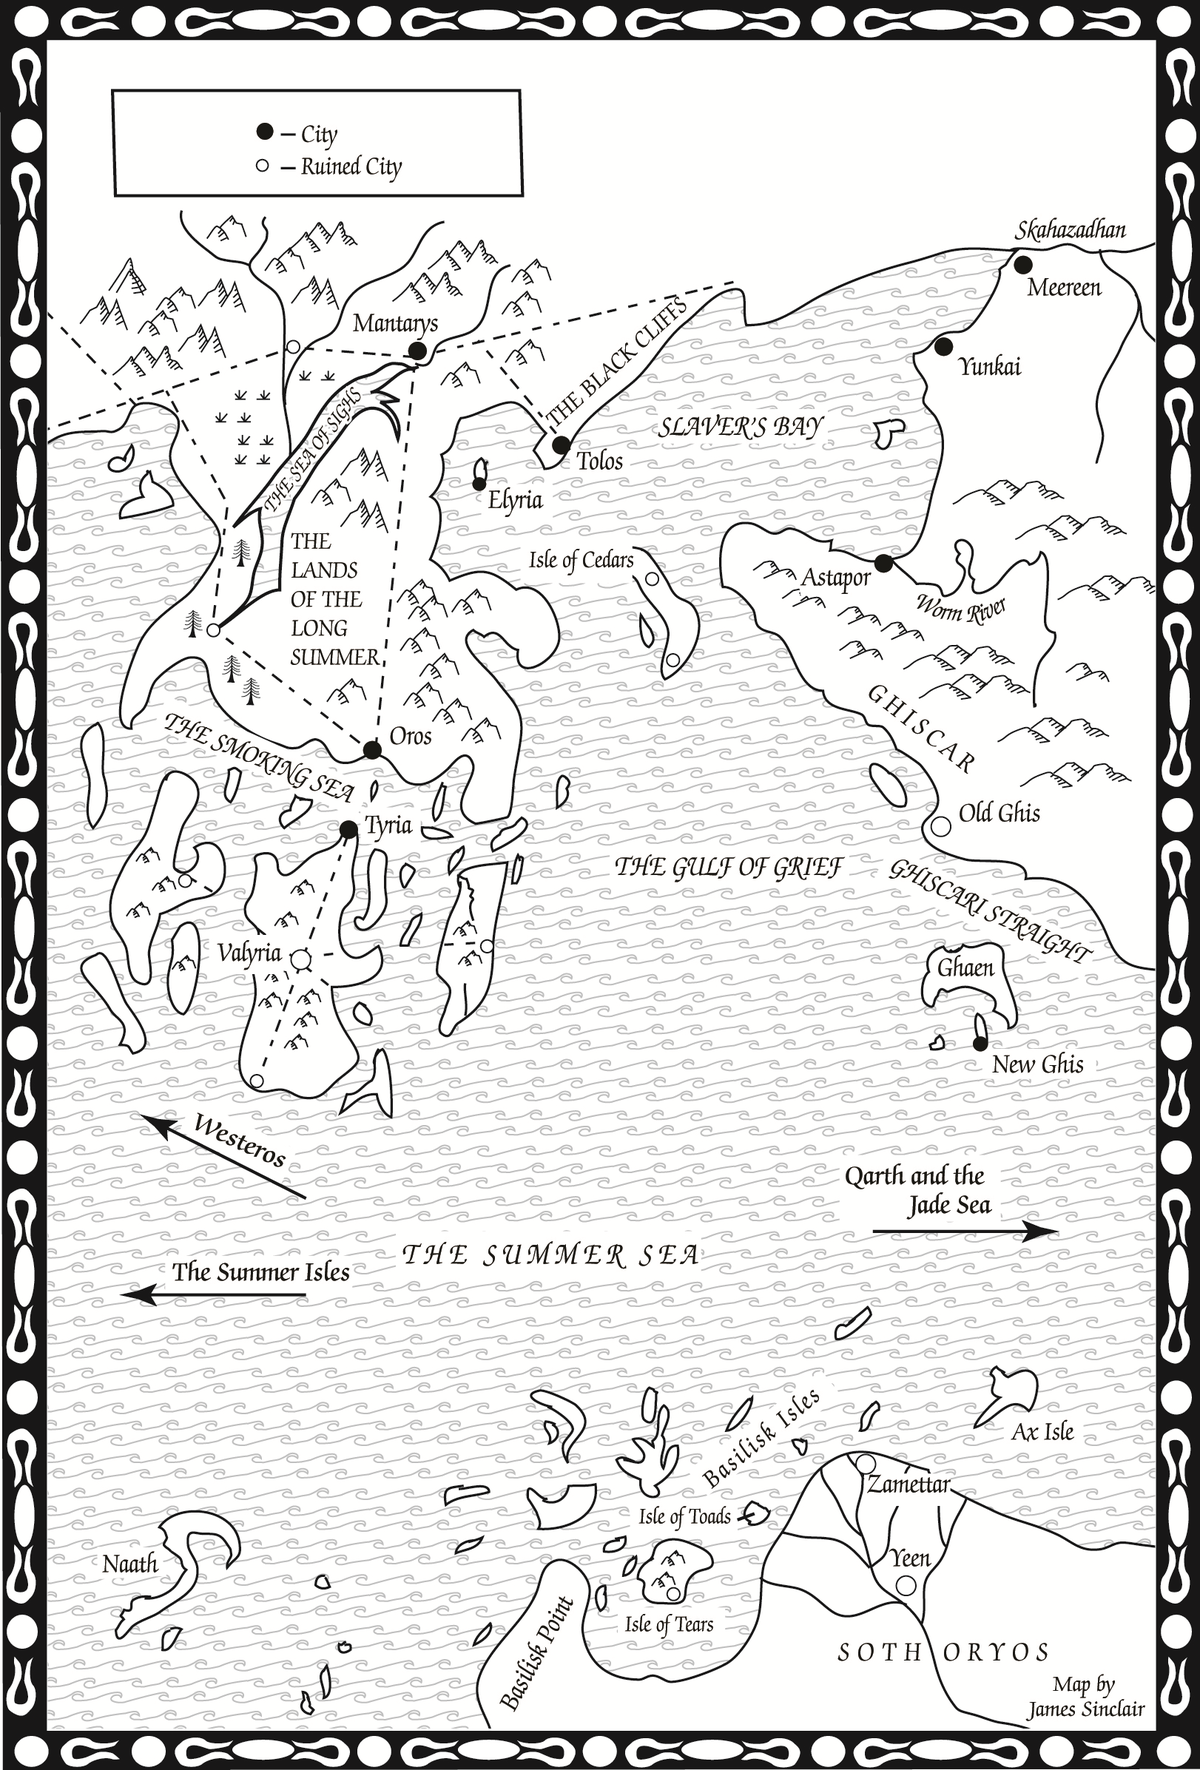 A Storm of Swords-Map of Slaver's Bay - A Wiki of Ice and Fire